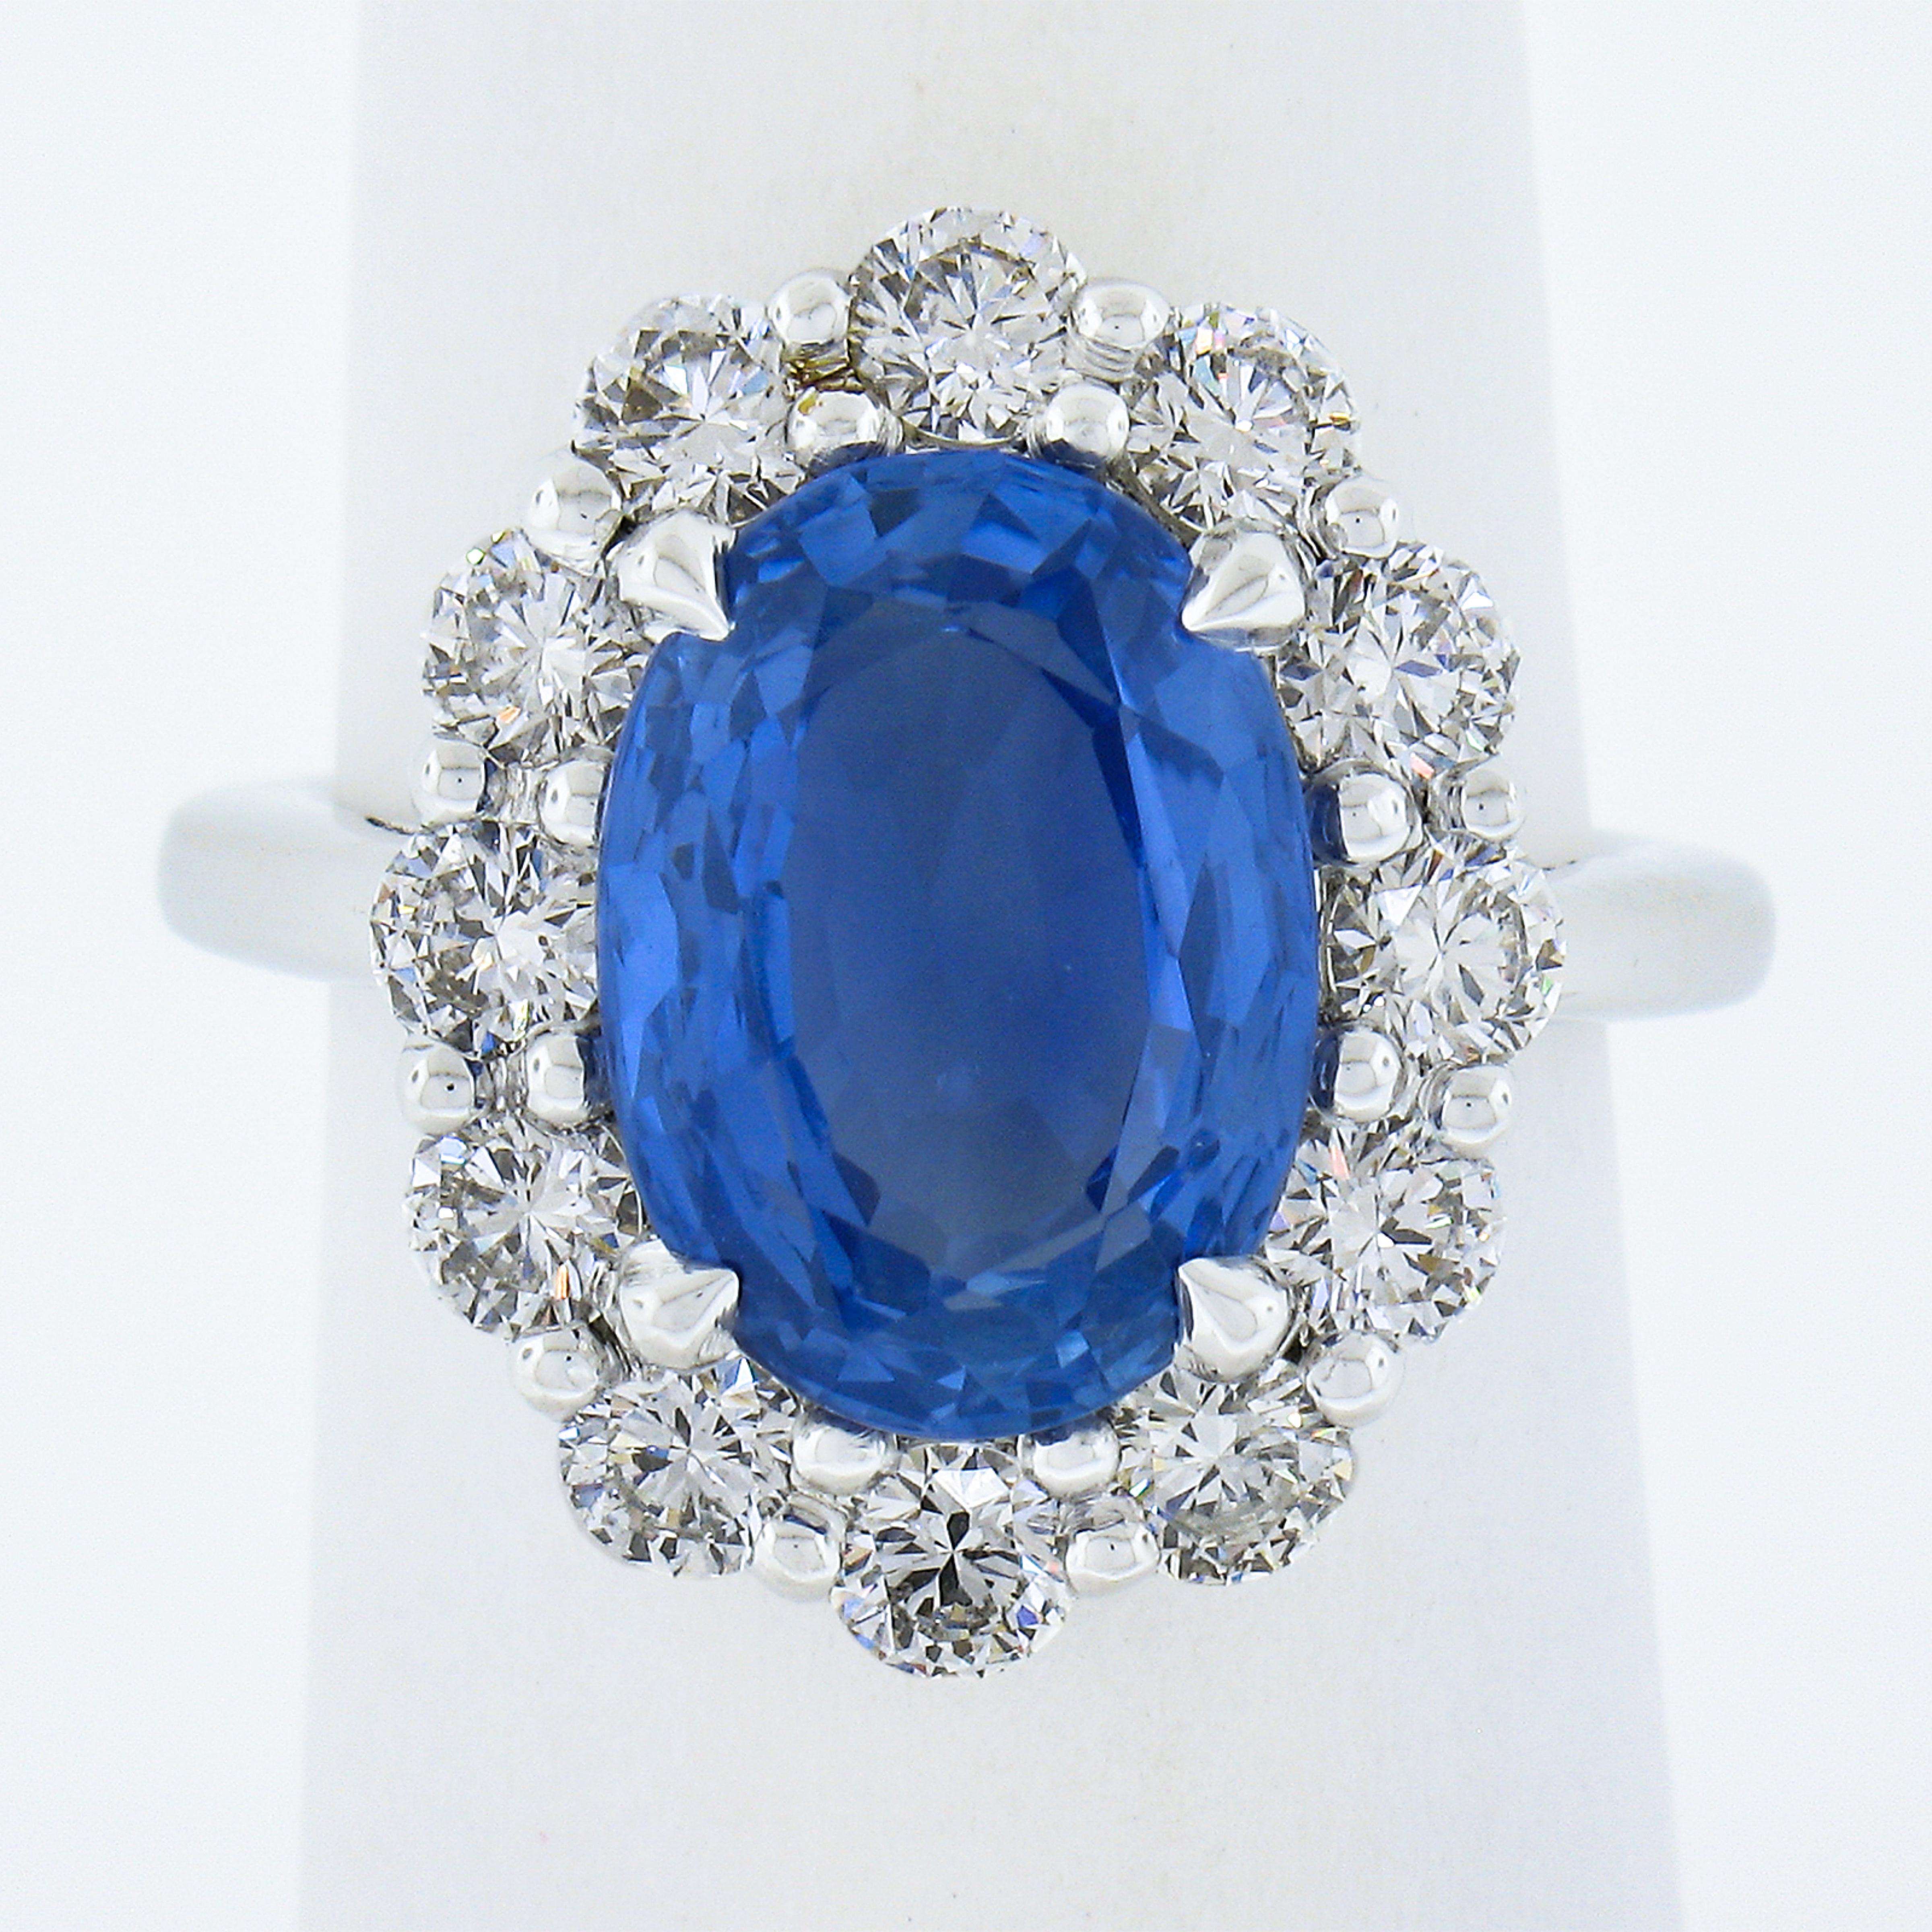 This brand new sapphire and diamond Princess Diana engagement/cocktail ring is crafted in solid platinum and features a stunning 6.08 carats of the most wonderful cornflower blue imaginable with a classic and perfectly proportioned oval cut. It